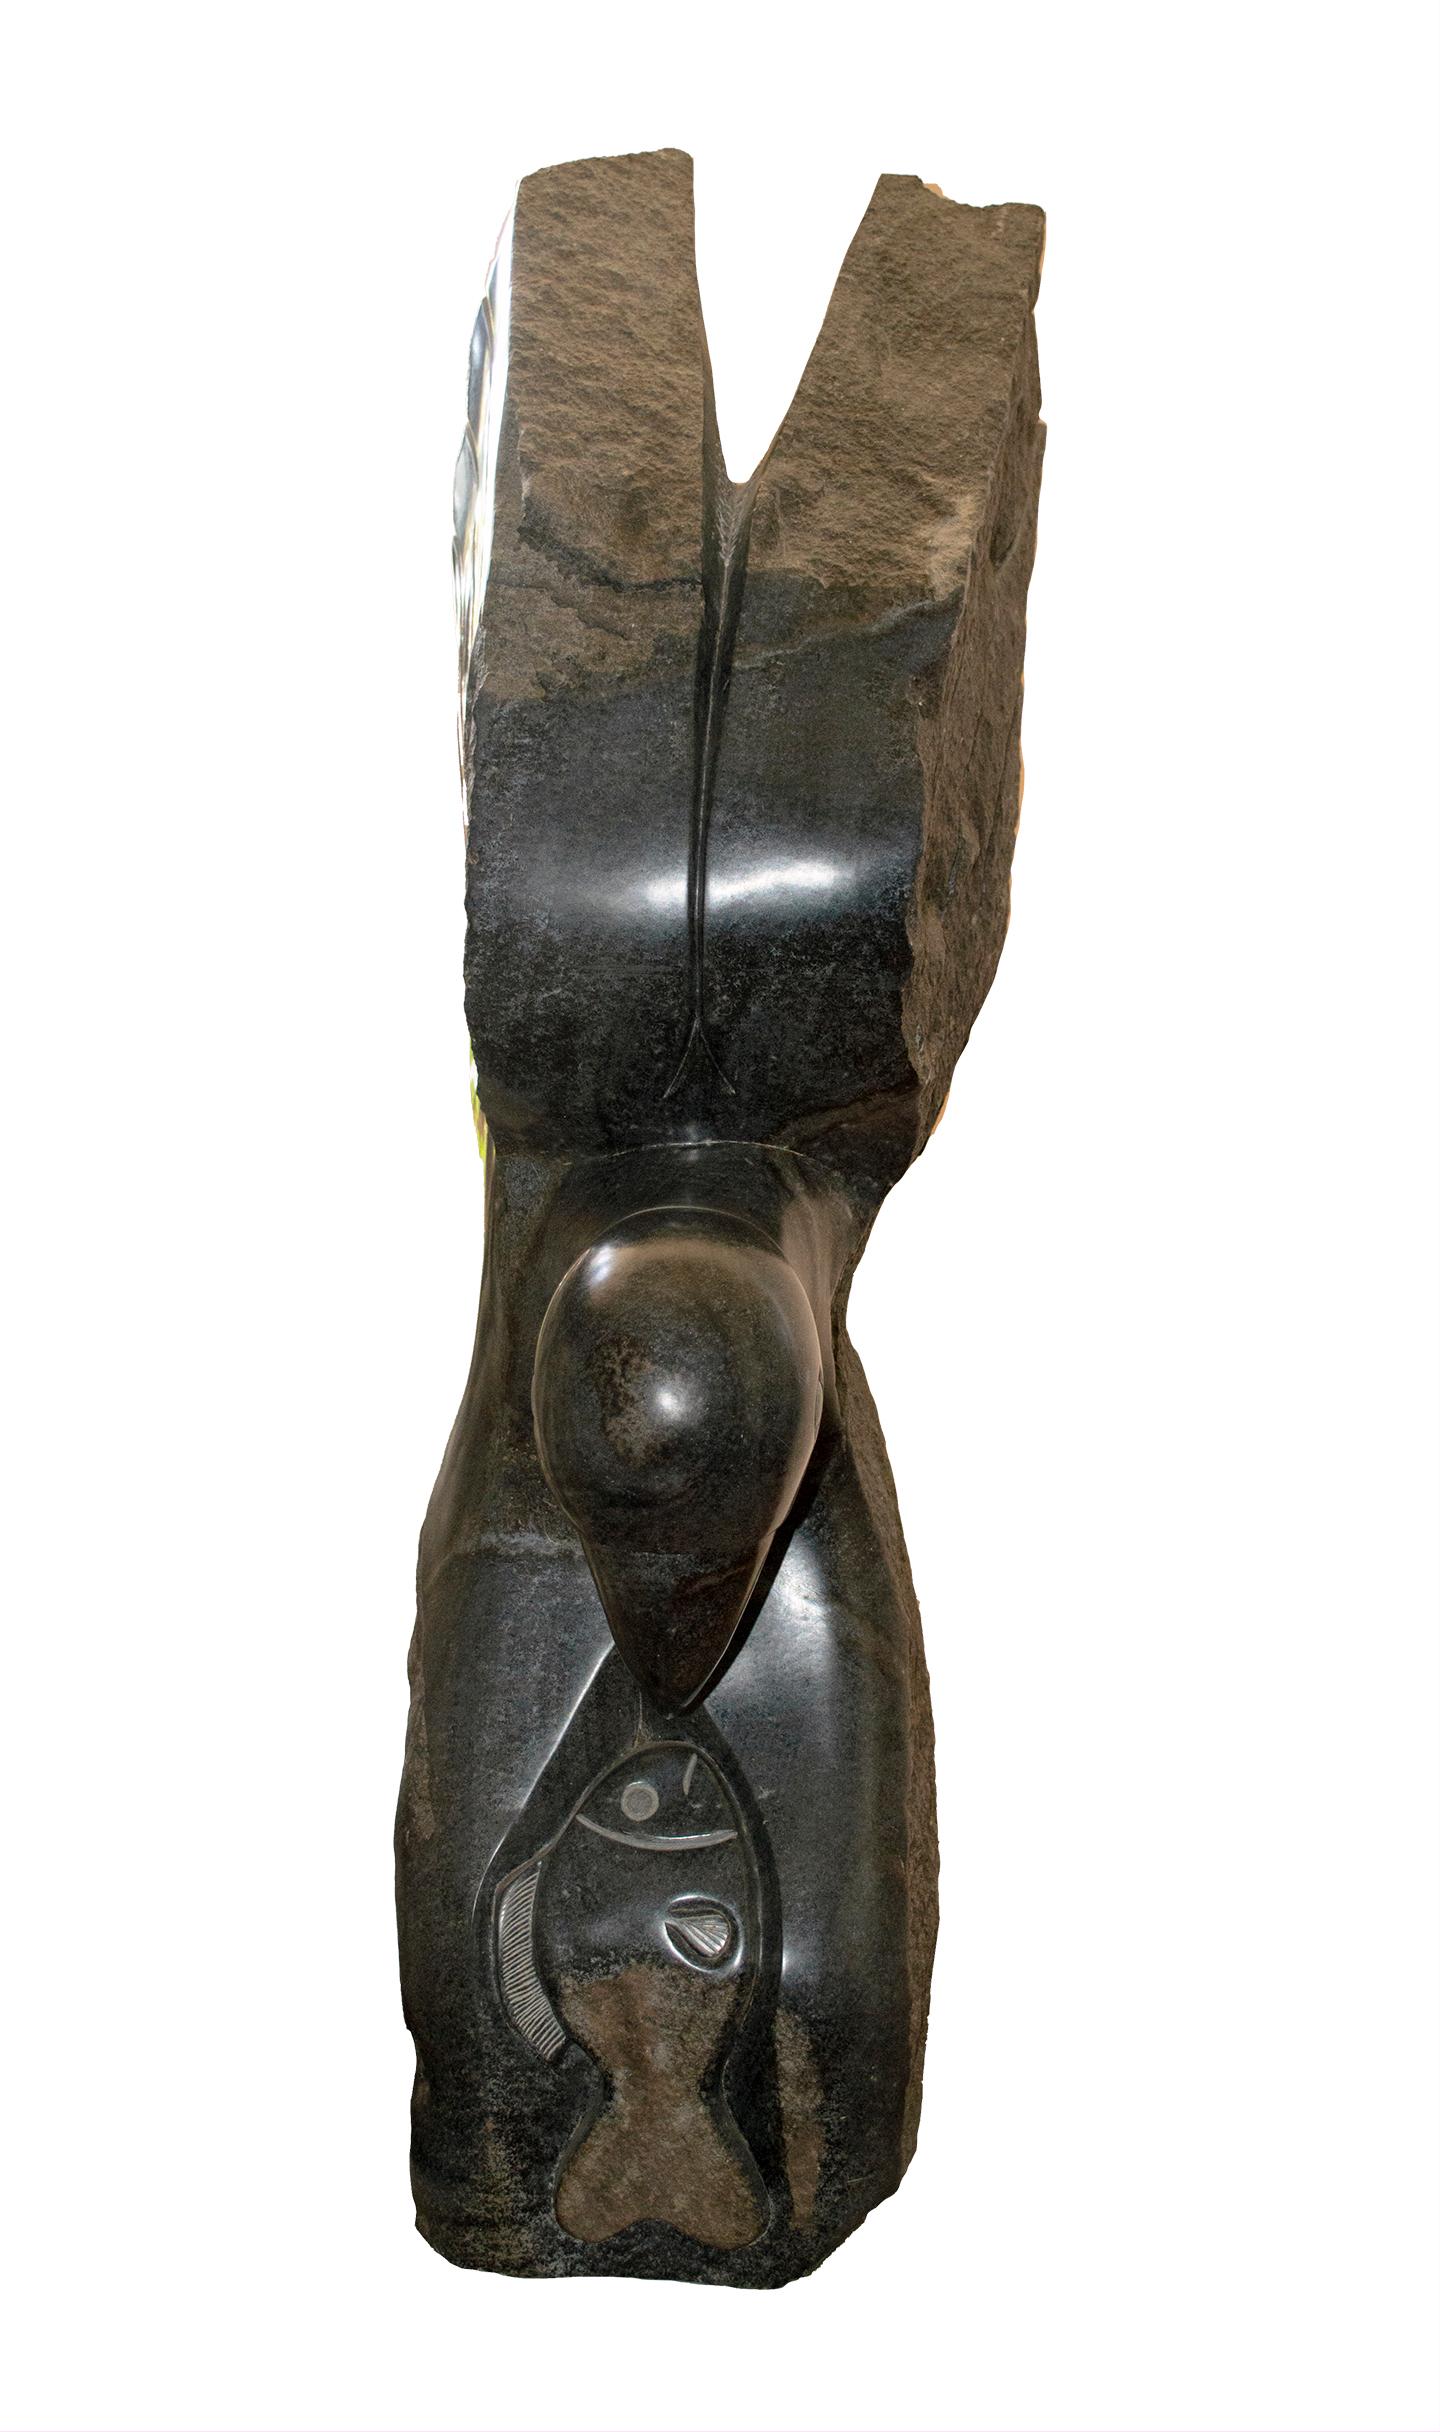 'Fish Eagle' original springstone Shona sculpture signed by Terence Nehumba - Sculpture by Terence Paradzai Nehumba